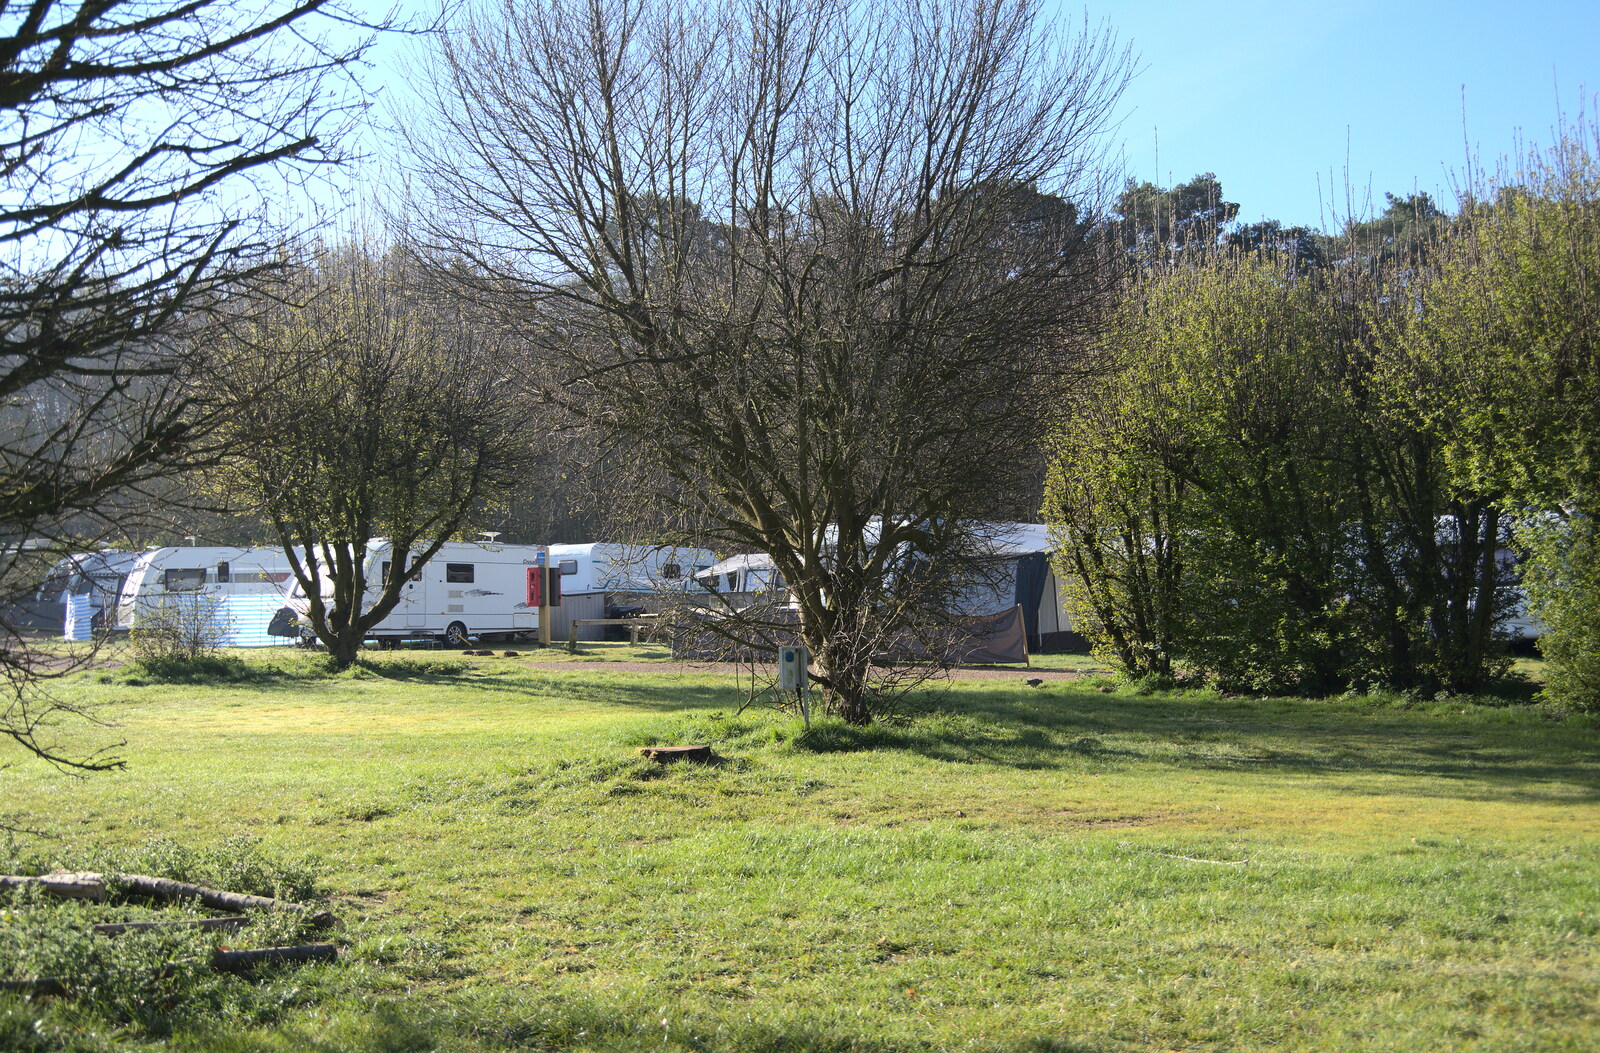 A Camper-Van Trip, West Harling, Norfolk - 13th April 2022: The view from our pitch im the morning